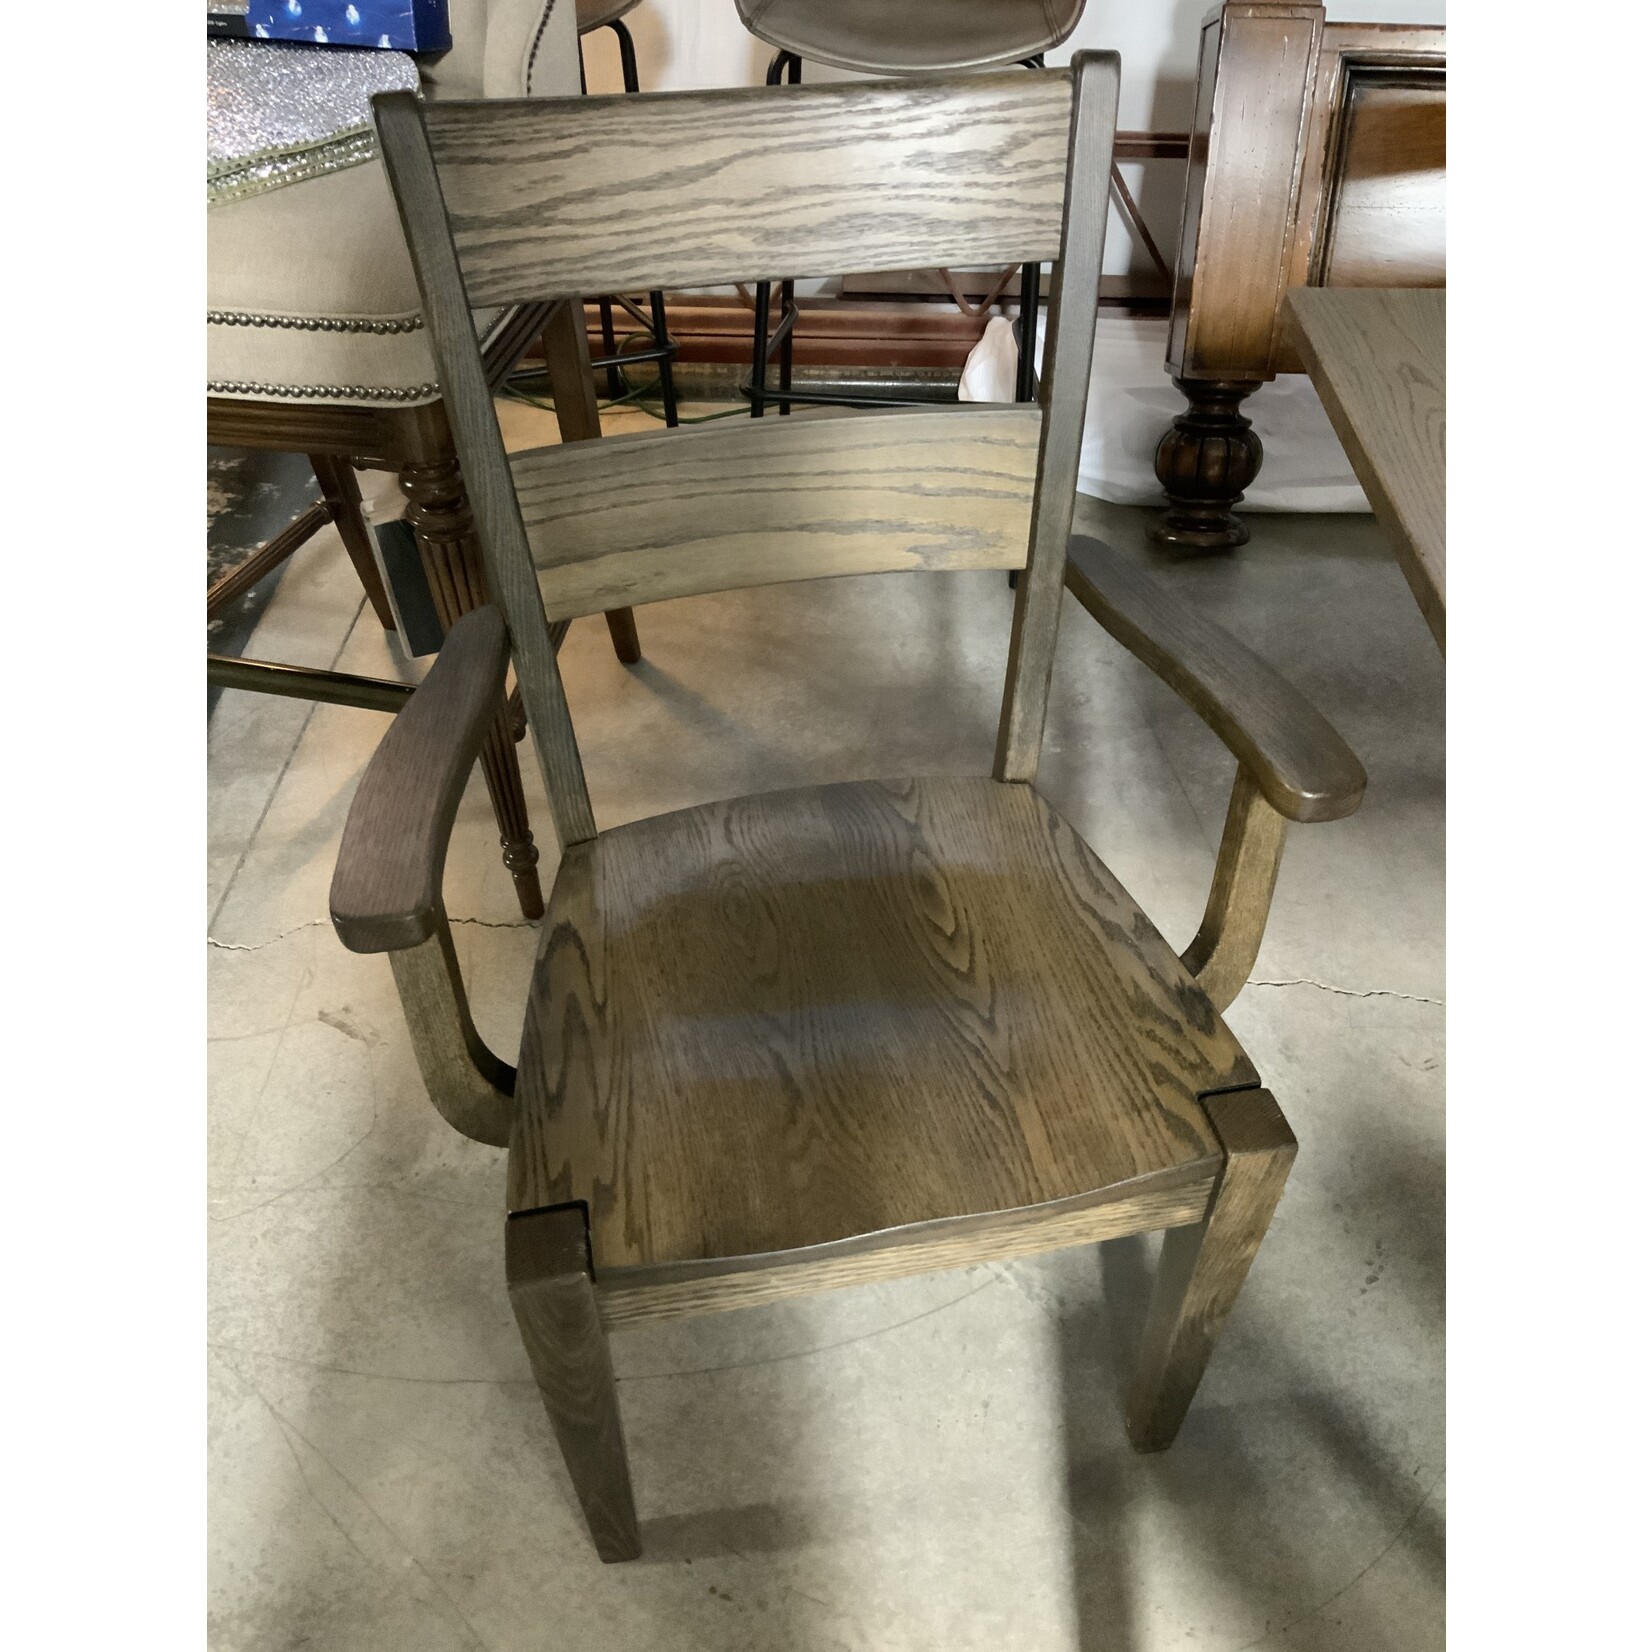 Keystone Collections Canterbury Arm Chair